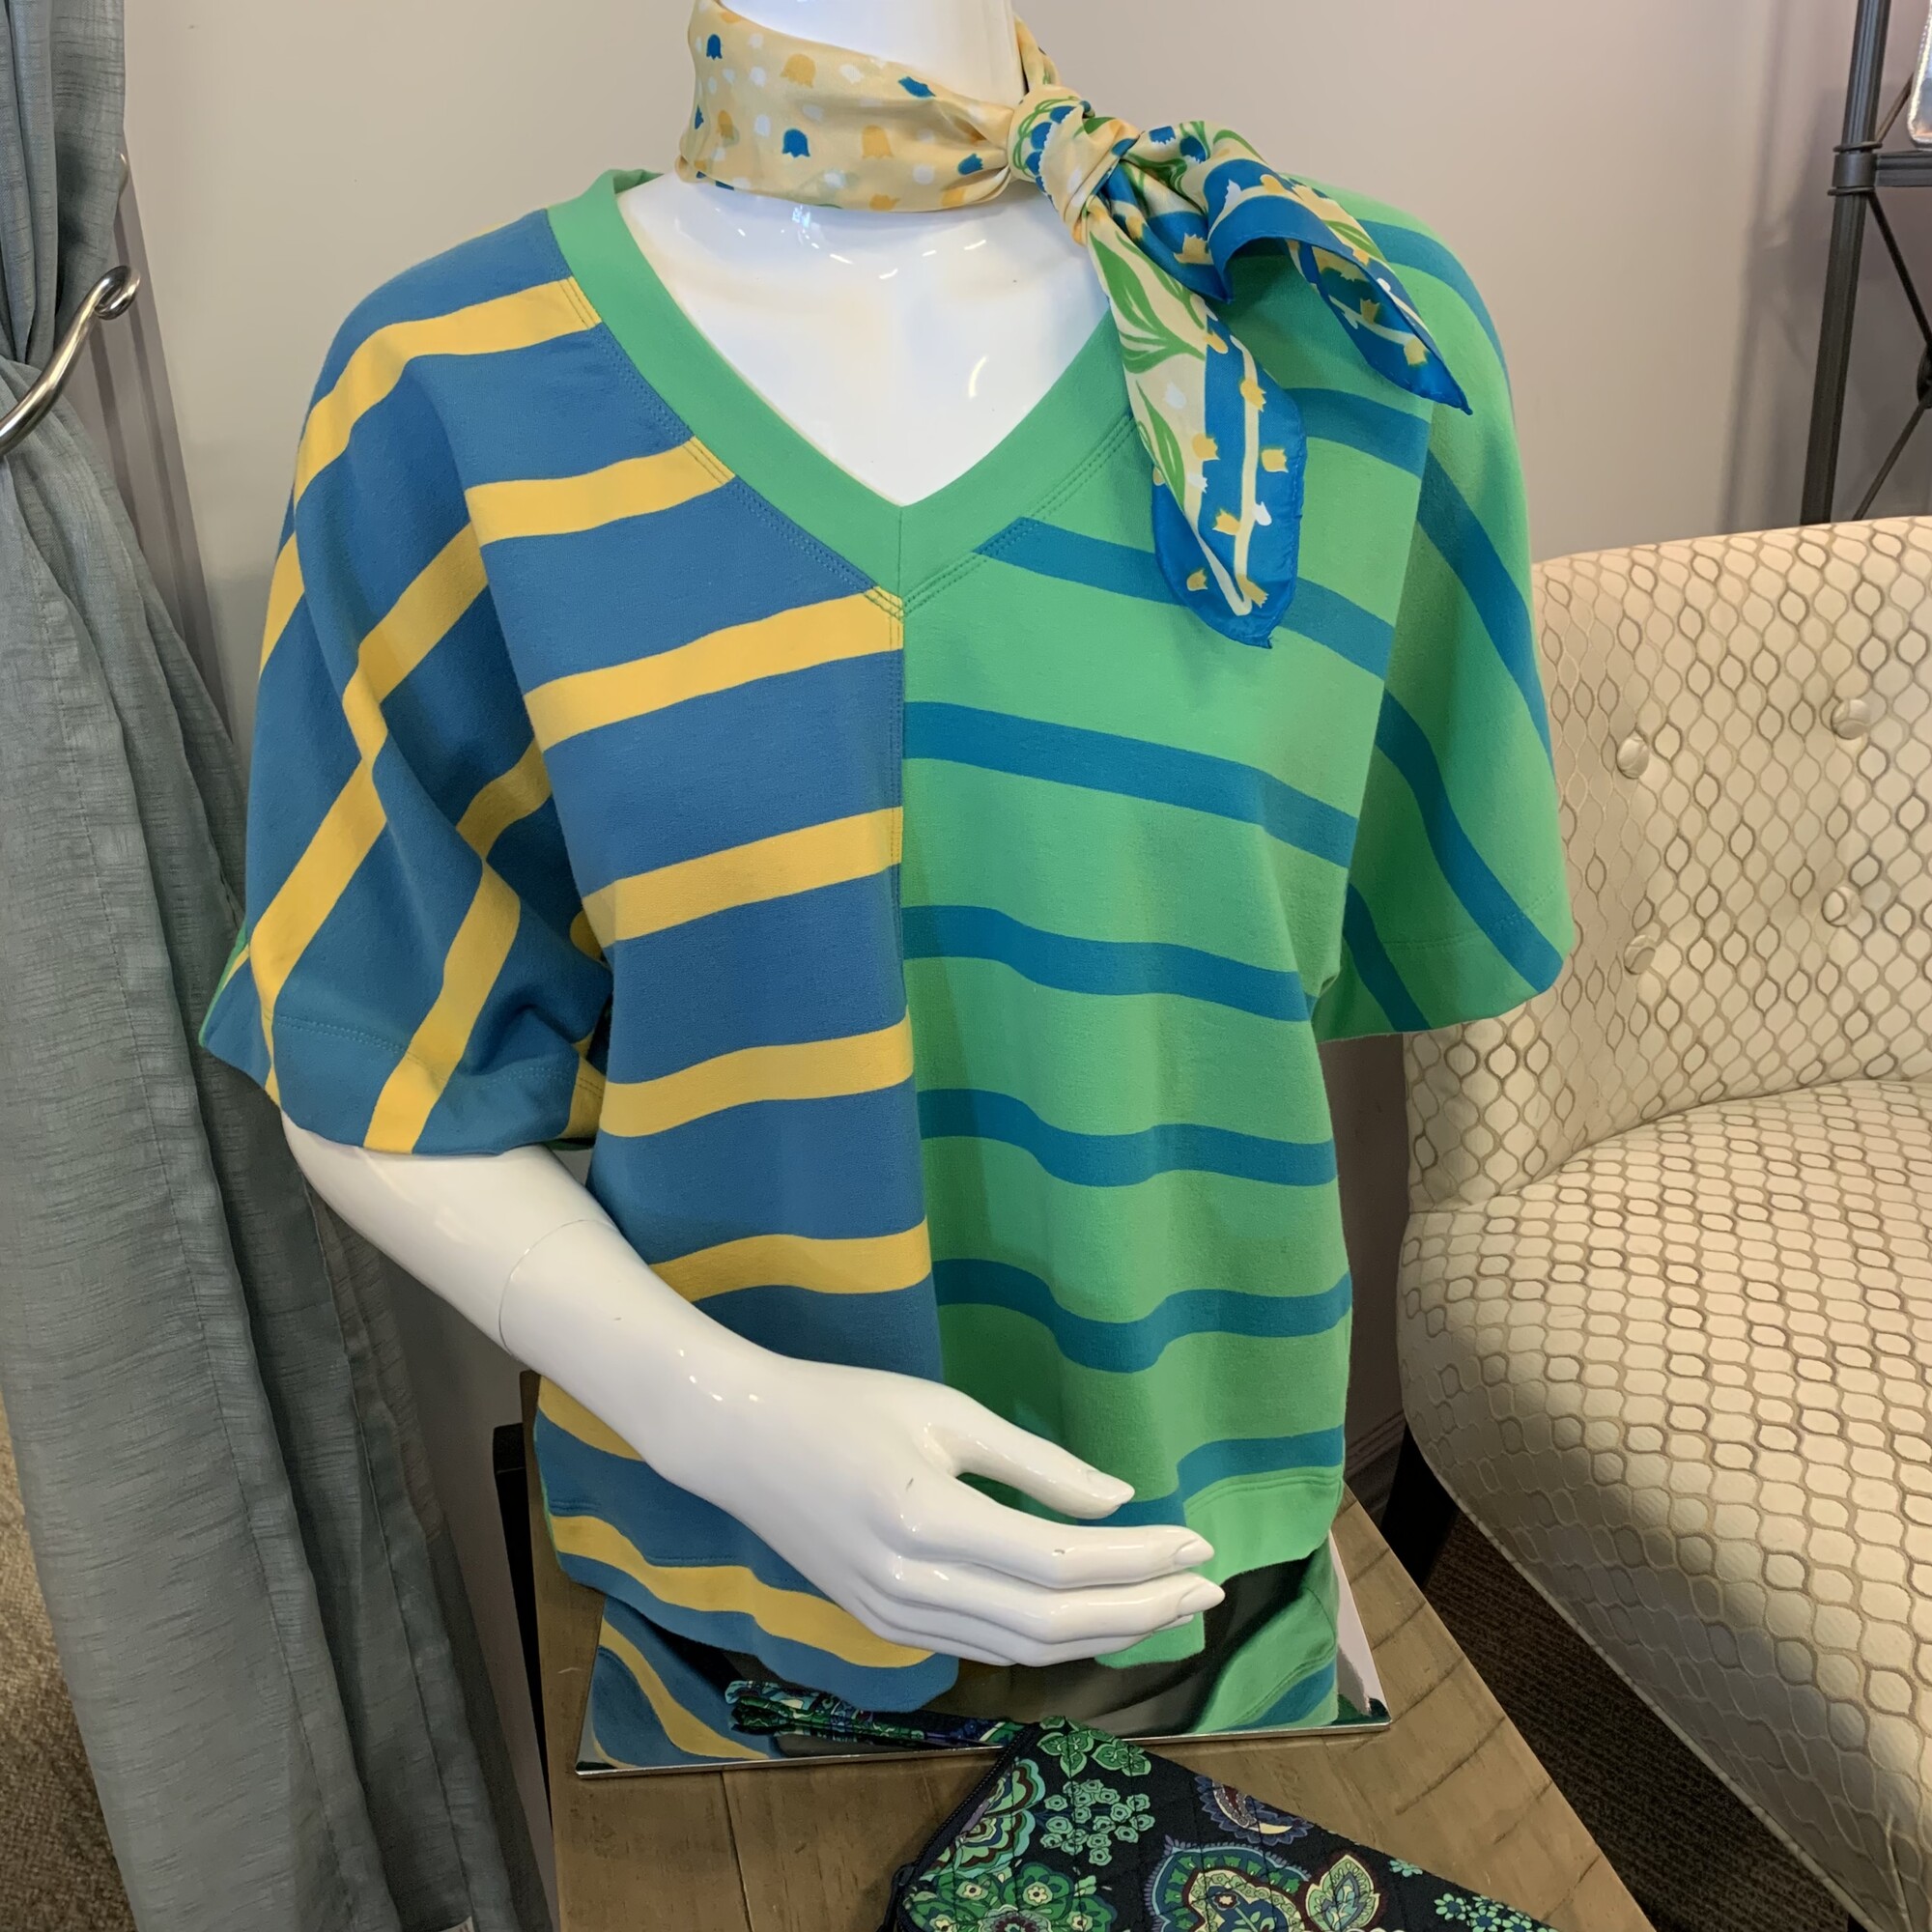 Cabi V-neck Jersey Shirt,
Colour: Base Green with blue and yellow,
Size: XSmall generous